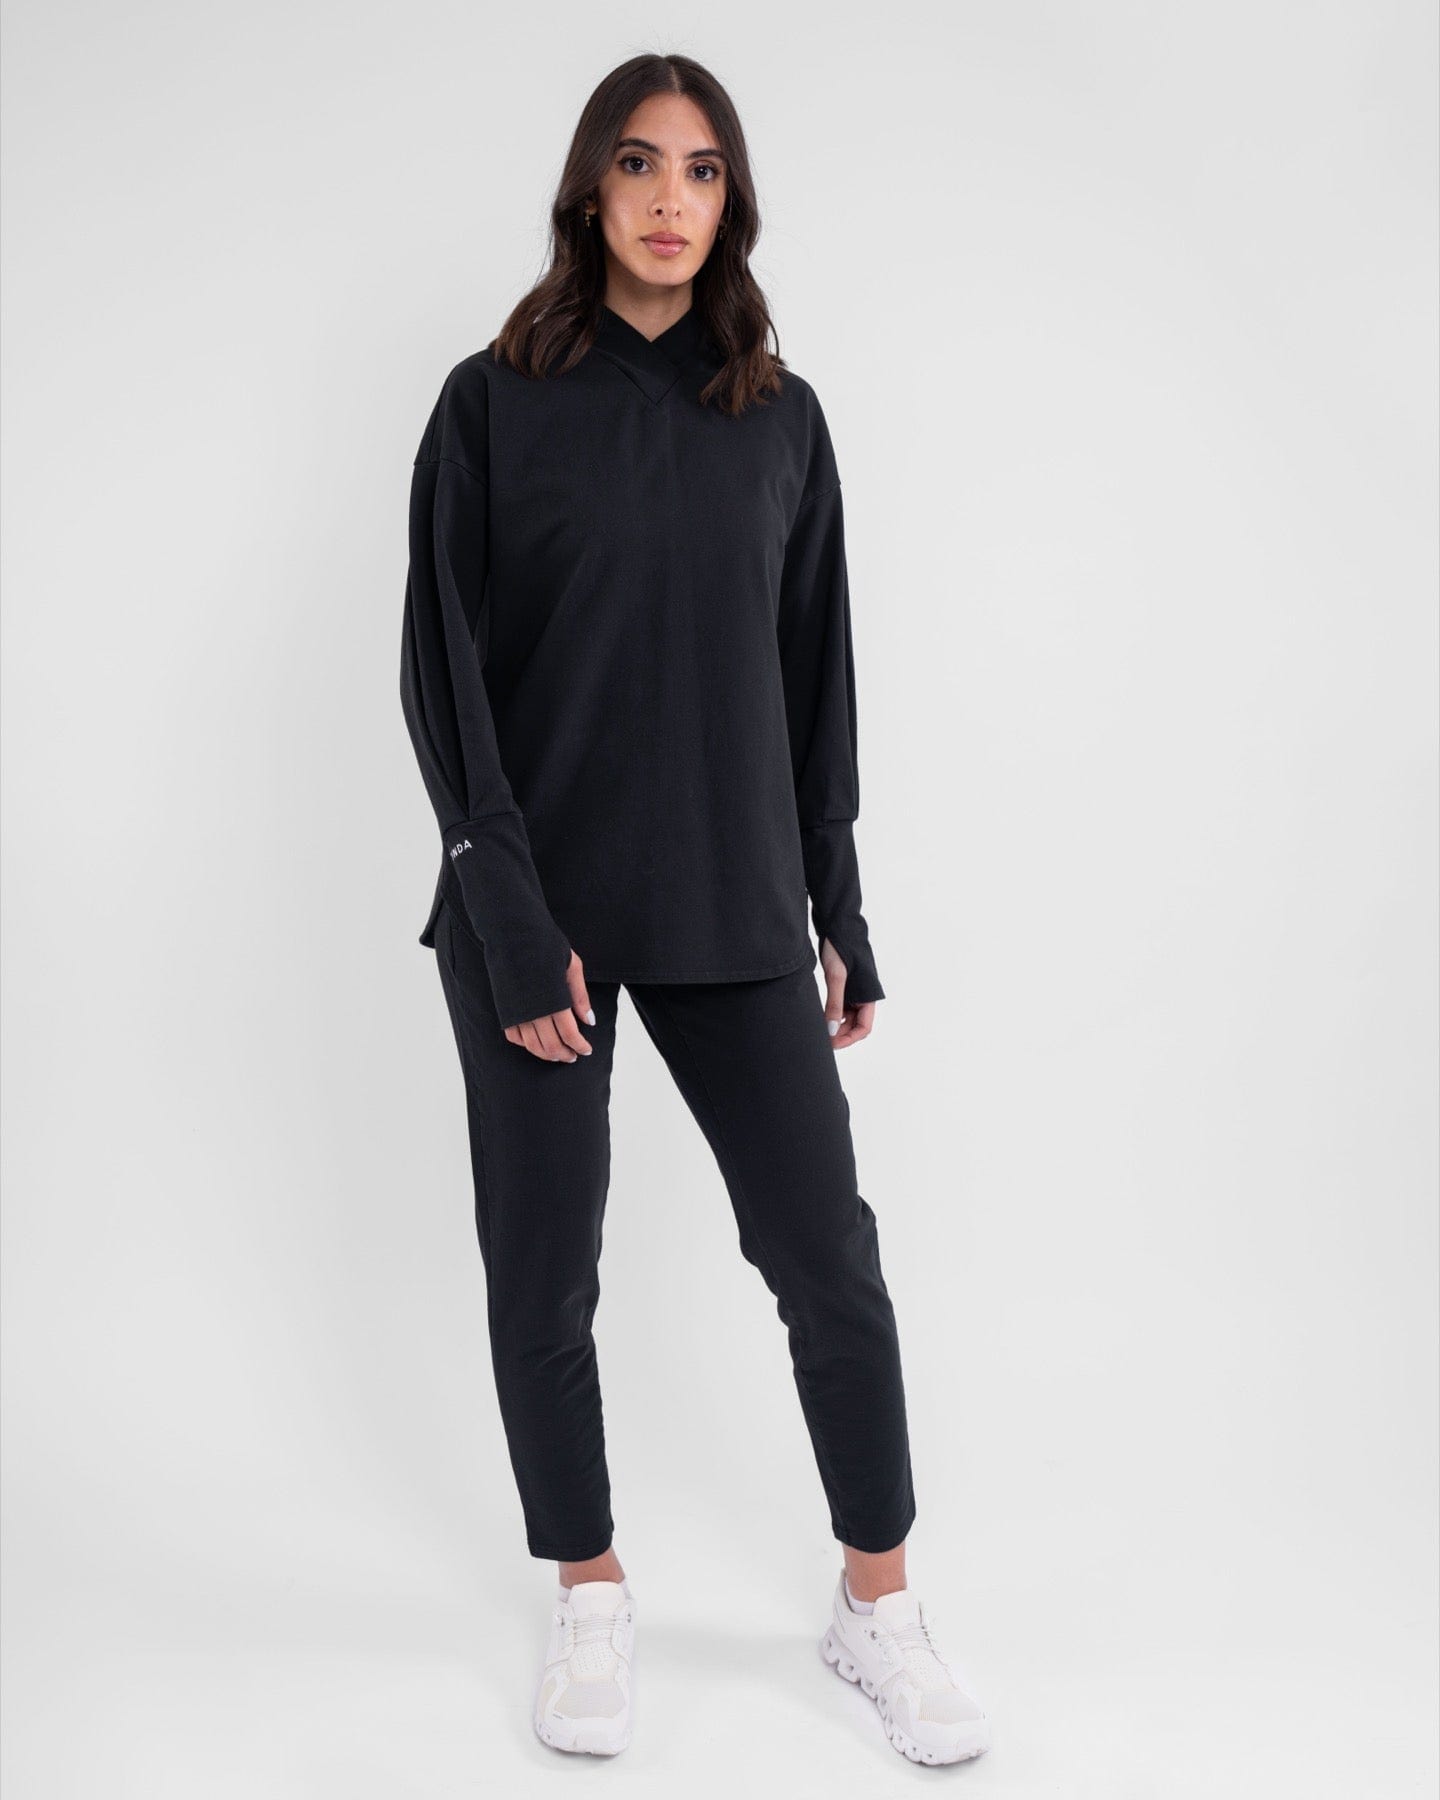 A woman stands confidently modeling a modest SWEATER by qynda and slim pants, both made from moisture-wicking cotton terry loop fabric, complemented by a pair of white shoes.